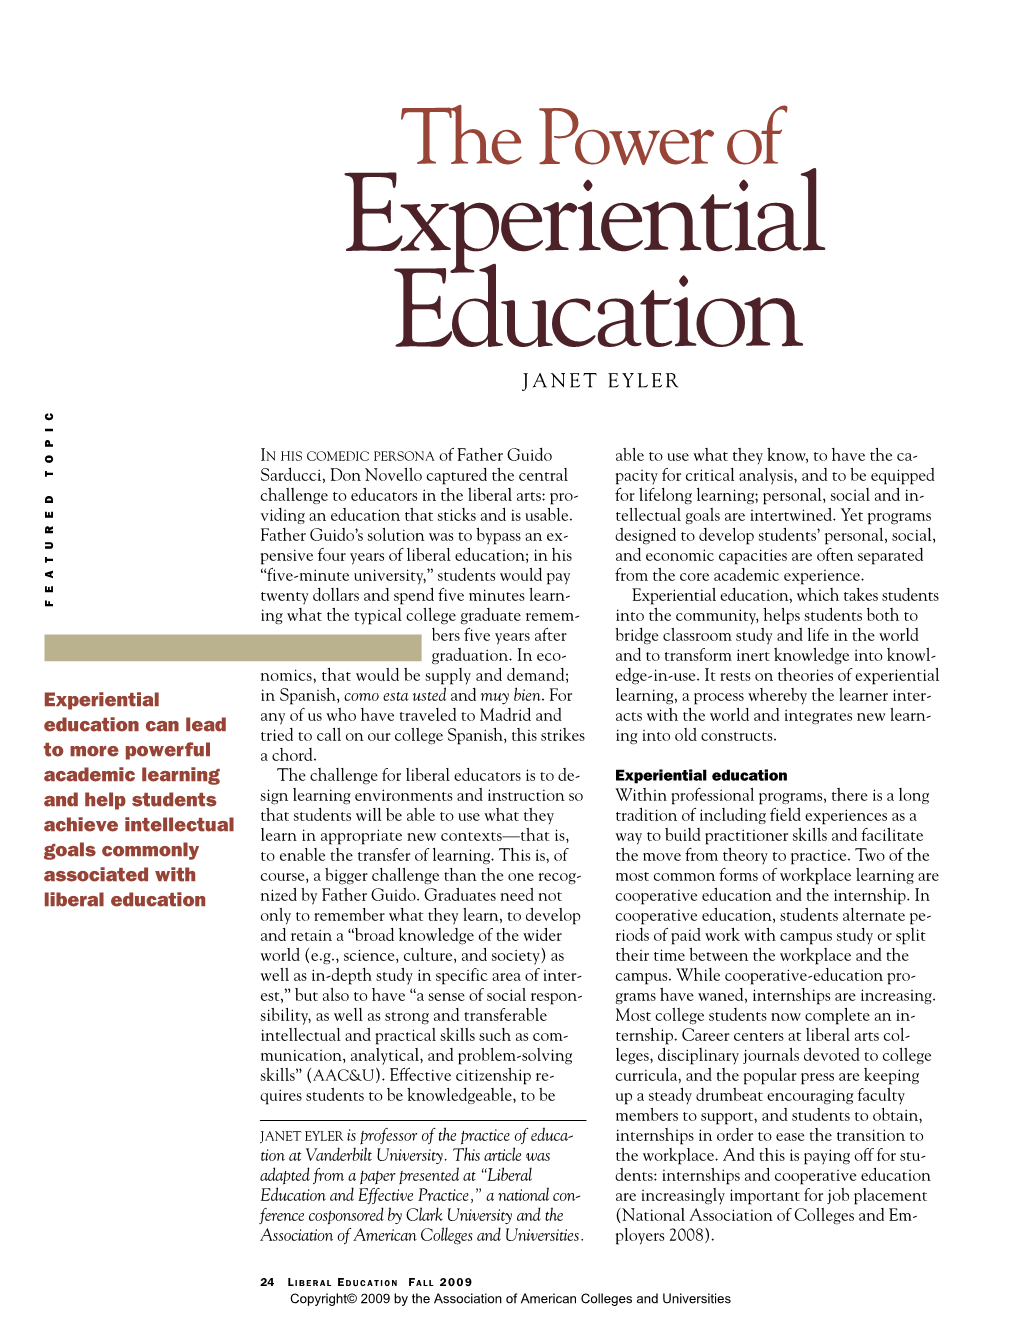 The Power of Experiential Education JANET EYLER